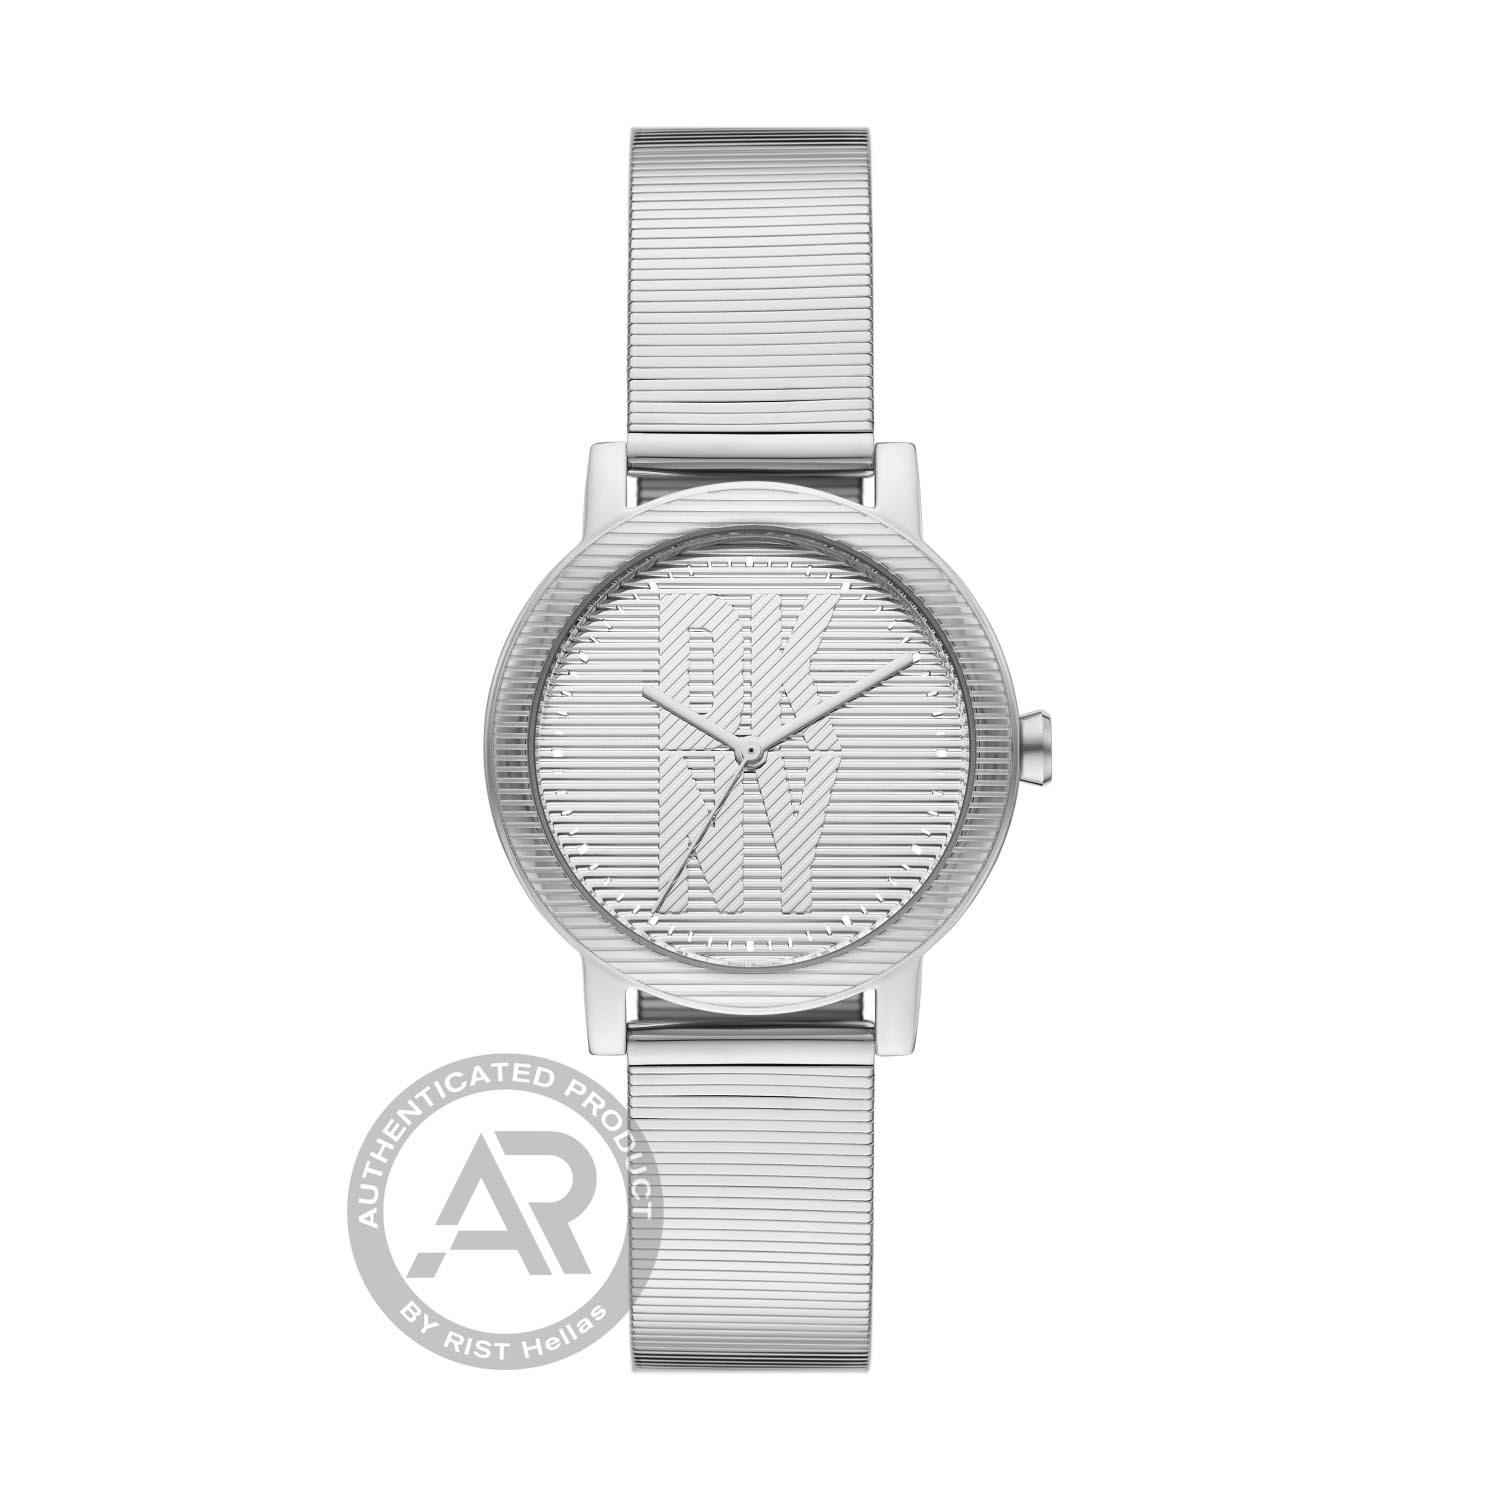 Womens DKNY SOHO watch in silver stainless steel with silver dial and bracelet.